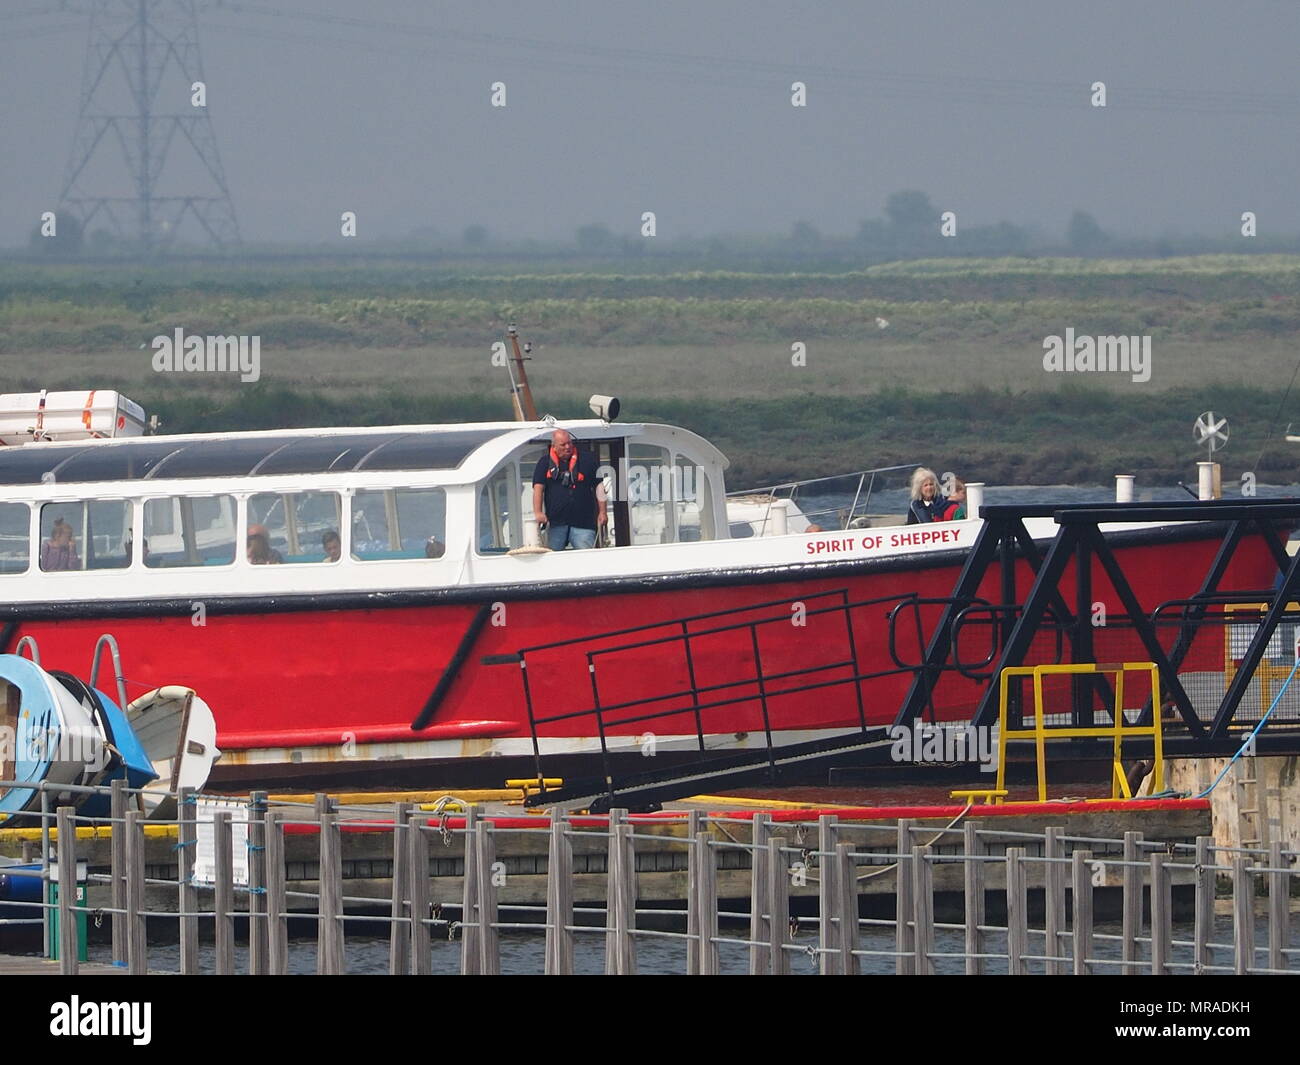 Queenborough, Kent, UK. 26th May 2018. A new ferry service from Queenborough in Kent to Southend on sea in Essex started today. A new boat 'Spirit of Sheppey' operated by Island Cruises Ltd. set off on the inaugural journey this morning. By water the journey is around 6 miles, but considerably longer by car. It's hoped the new ferry service will boost tourism in the area. Pic: Spirit of Sheppey arrives from Southend ready for her maiden voyage. Credit: James Bell/Alamy Live News Stock Photo